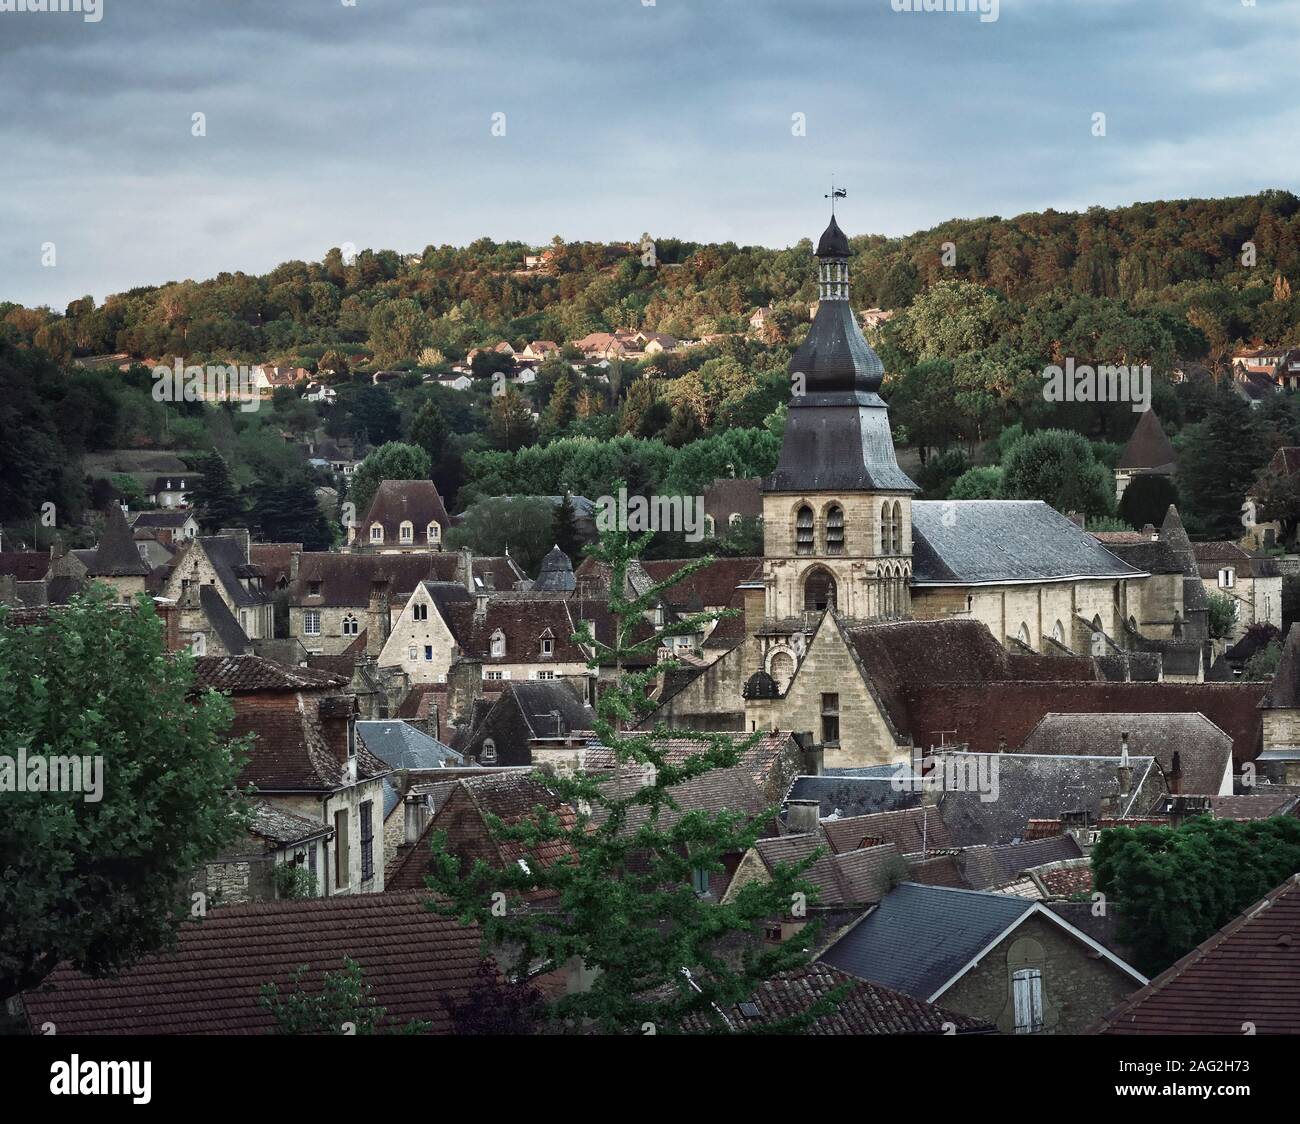 Daytime scenery of a Historic Medieval town of Sarlat in south of France. Sarlat-la-Canéda, Sarlat la Caneda, Dordogne, France travel photography. Stock Photo